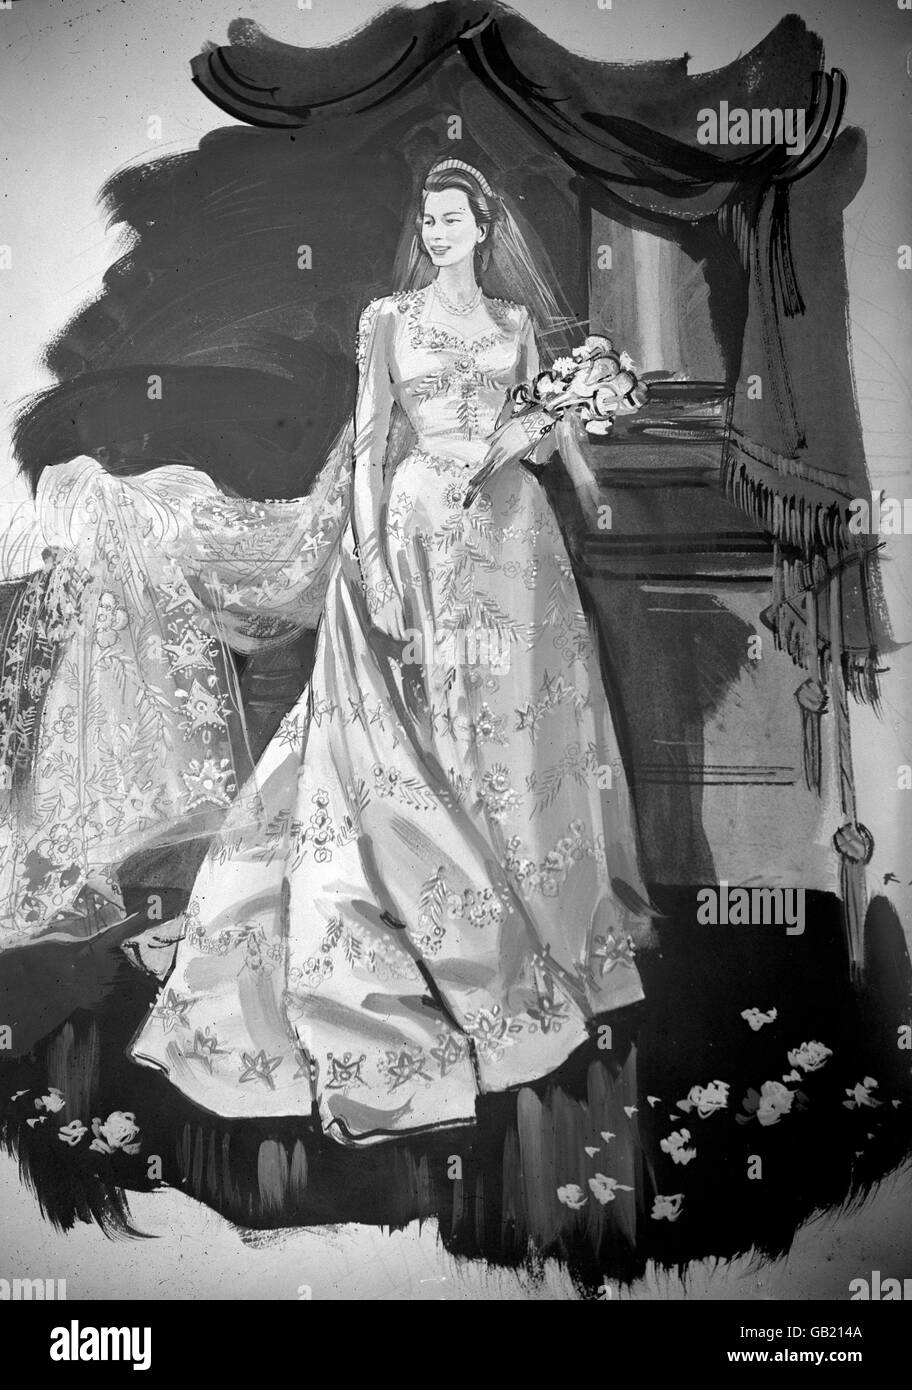 An artist's impression of Princess Elizabeth's wedding gown designed by Norman Hartnell for the wedding of Princess Elizabeth and Lieut. Phillip Mountbatten RN. It is a gown of ivory duchesse satin, cut on classic lines, with fitted bodice, long tight sleeves and full falling skirt. Stock Photo